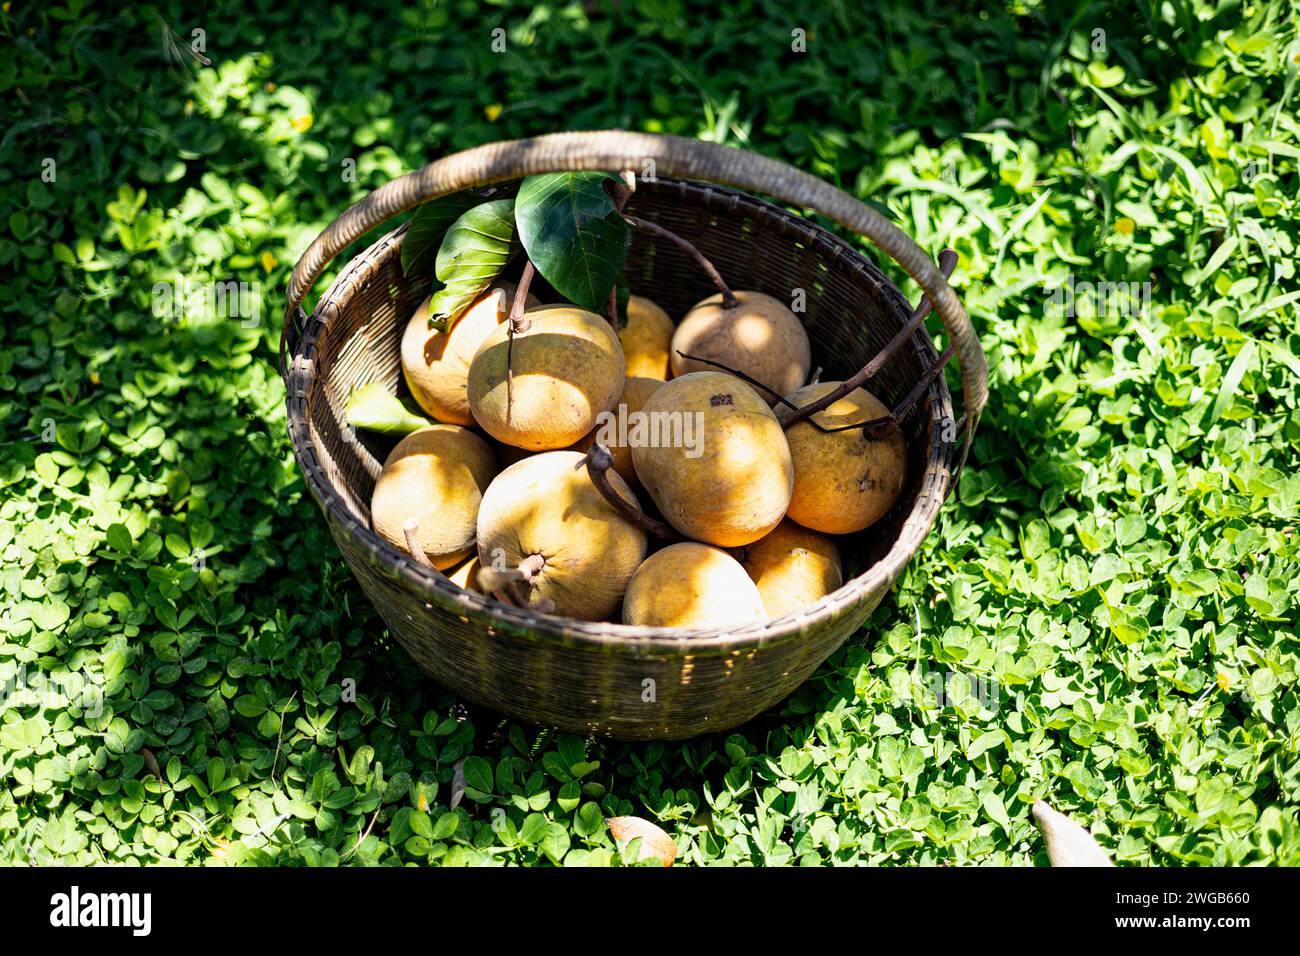 Heap of Santols in bamboo basket. Stock Photo